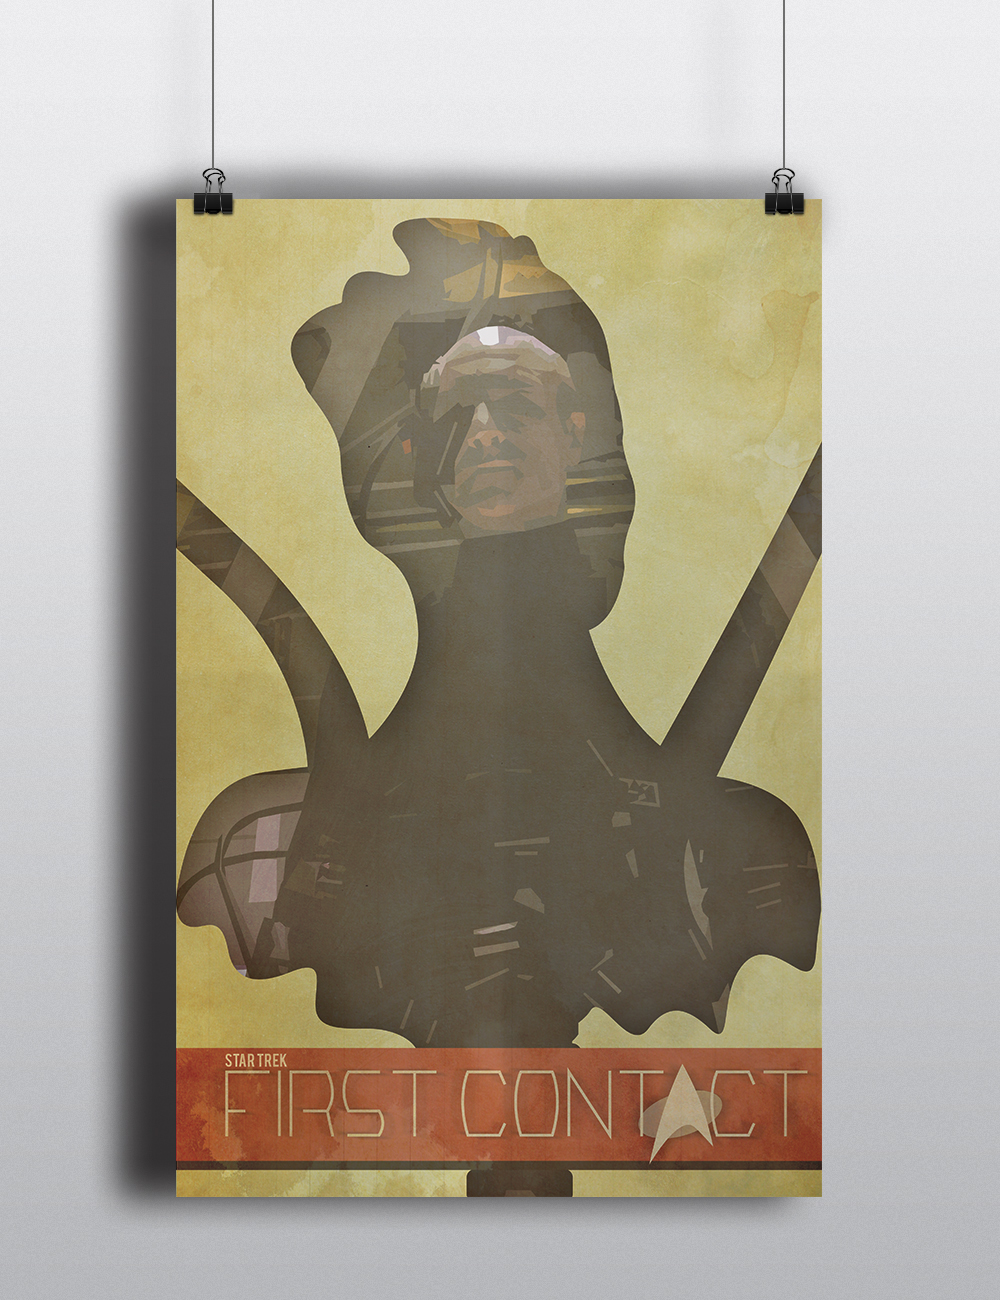 Star Trek borg first contact Data jean luc poster design redesign Promotional campaign